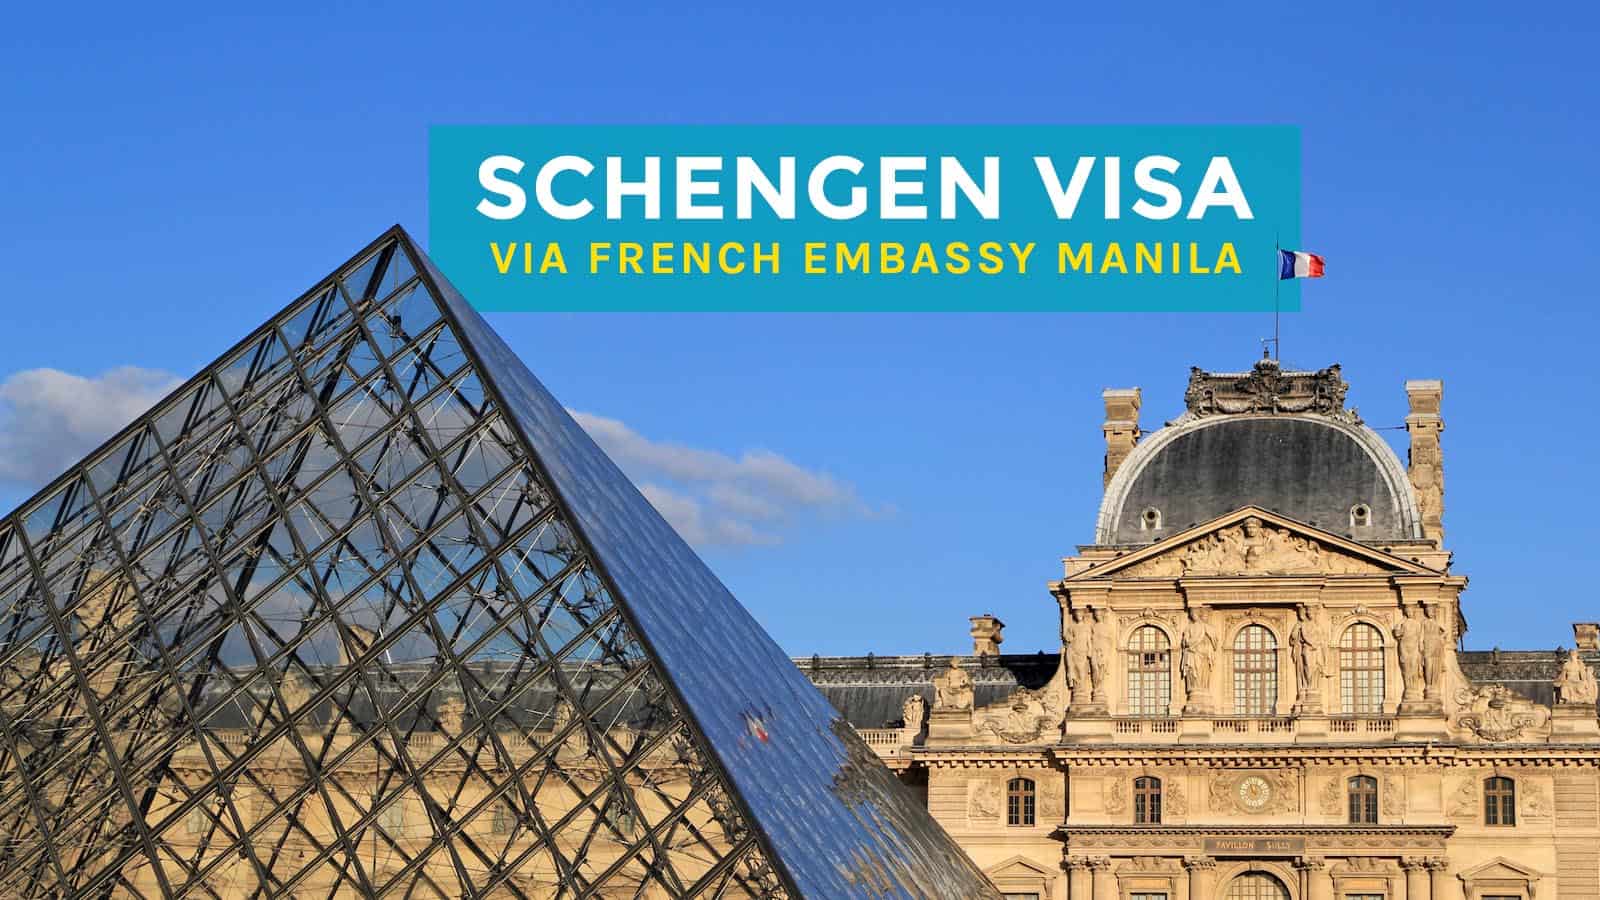 How to Apply for a SCHENGEN VISA via FRENCH EMBASSY